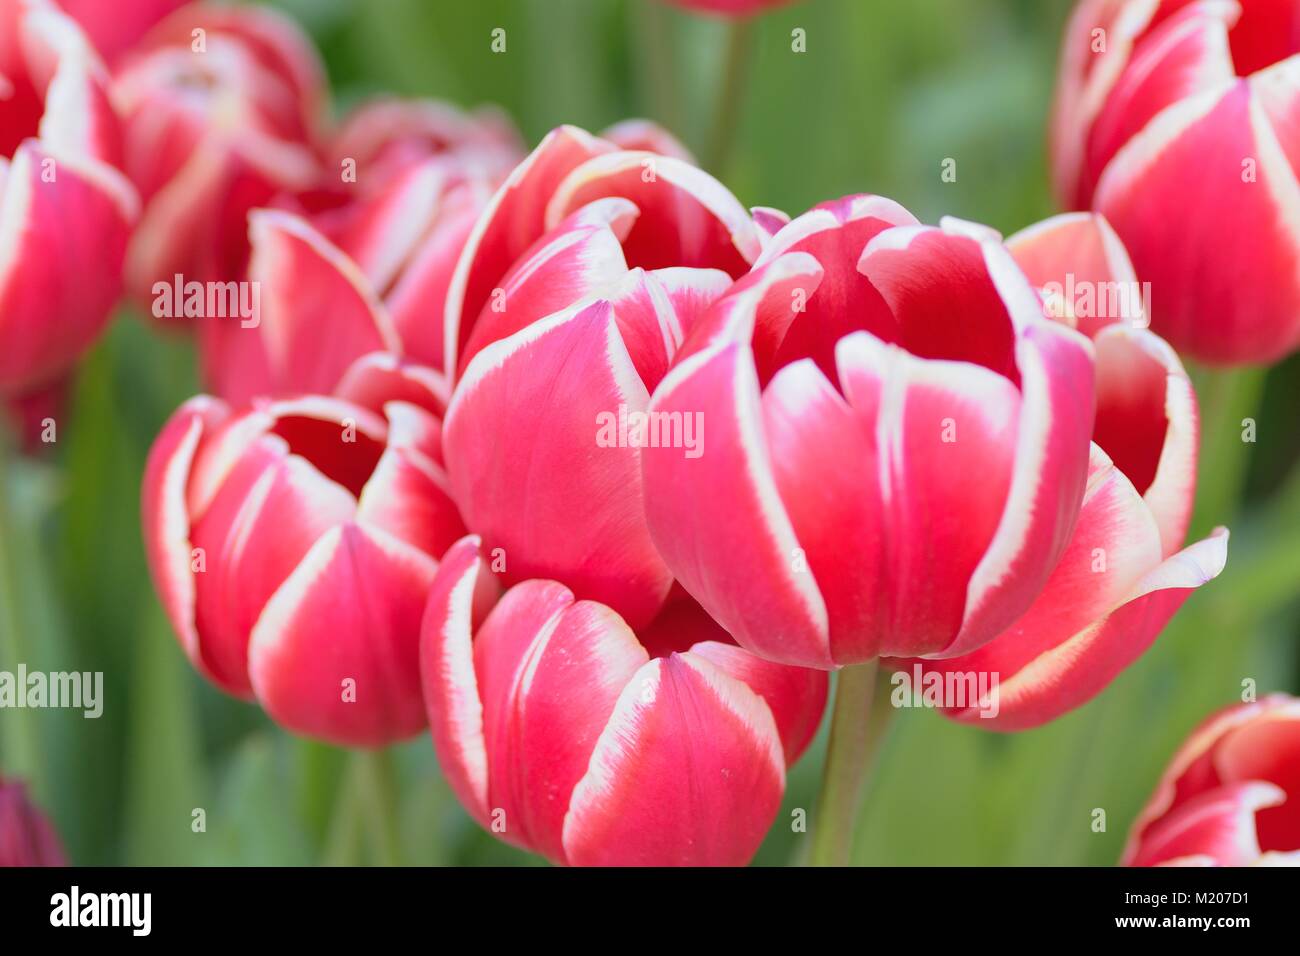 Macro background of colorful spring Tulip flowers at garden Stock Photo